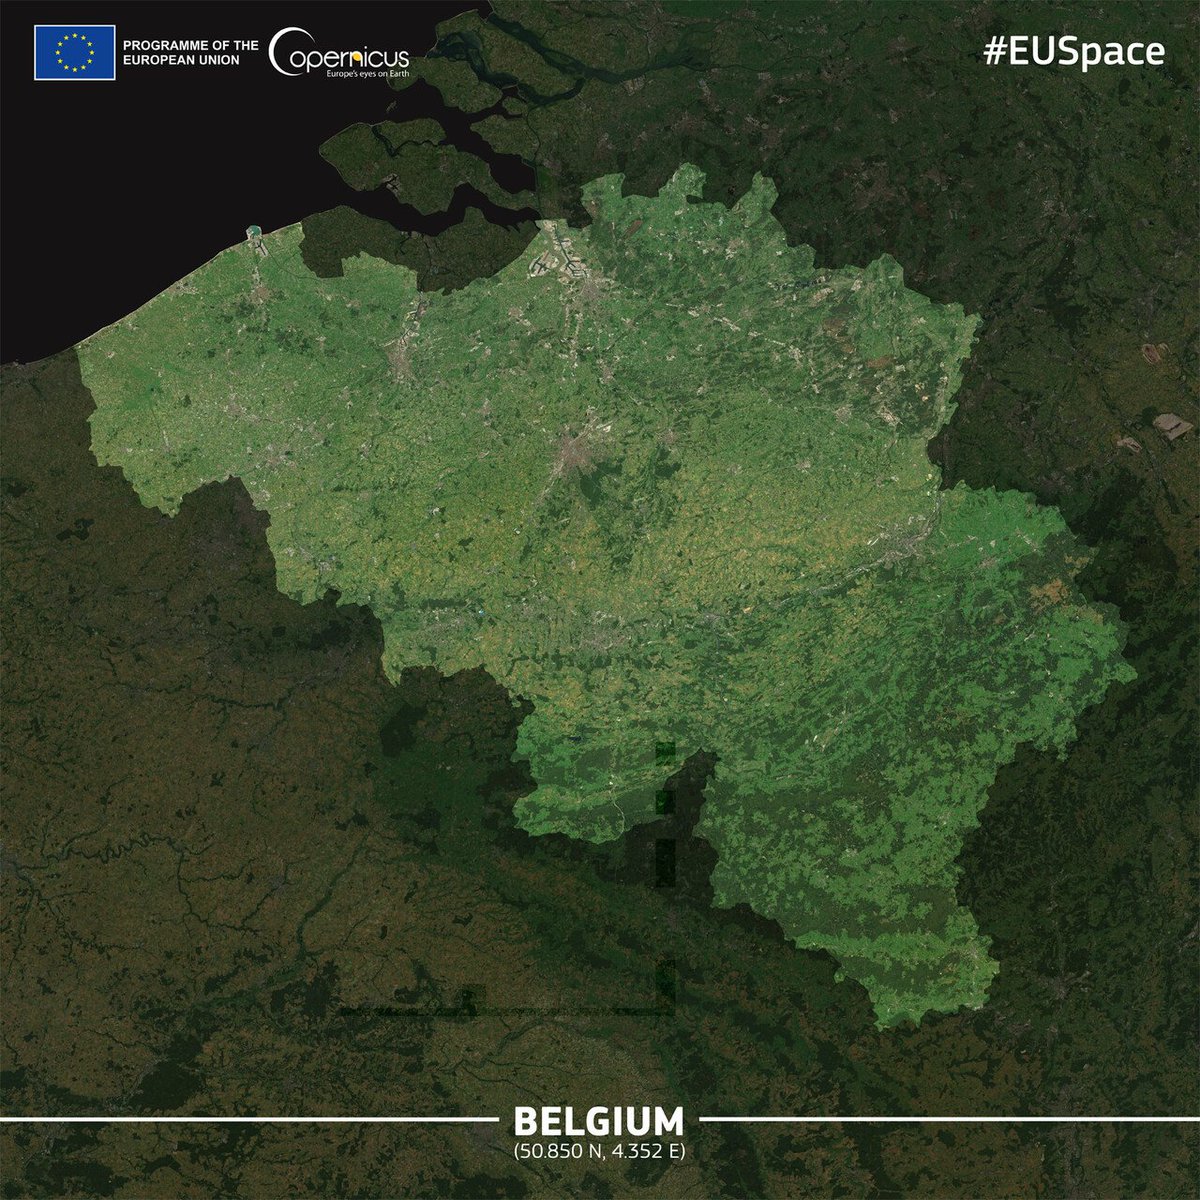 Happy #NewYear! The eyes of #EU Space 🇪🇺🛰️Programme unveil the beauty of #EU27, one Member State at a time Today, we show #Belgium We congratulate the 🇧🇪 Presidency of the Council of the #EU 🇪🇺 on its first day! #EUSpace🛰️ 🇪🇺 🛡️#EUDefenceIndustry